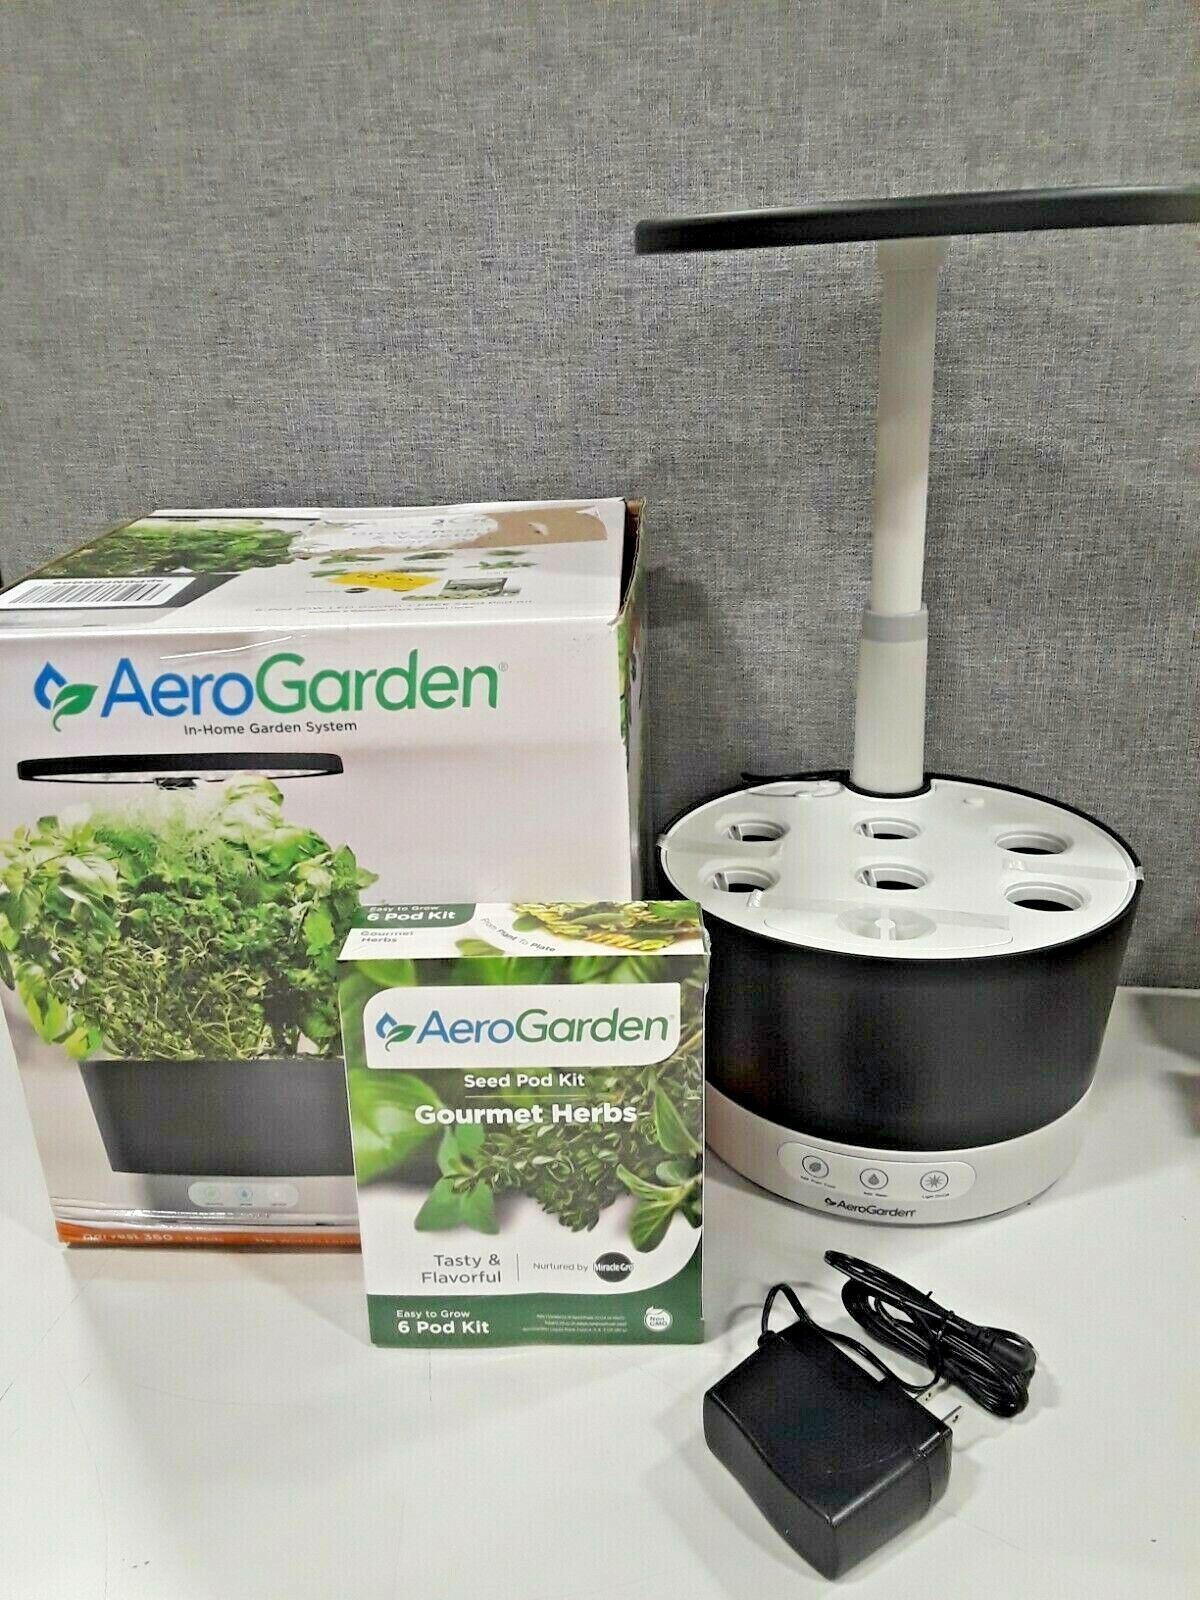 AeroGarden In-Home Garden System Soil Free Automatic Lights Remind To Add Water